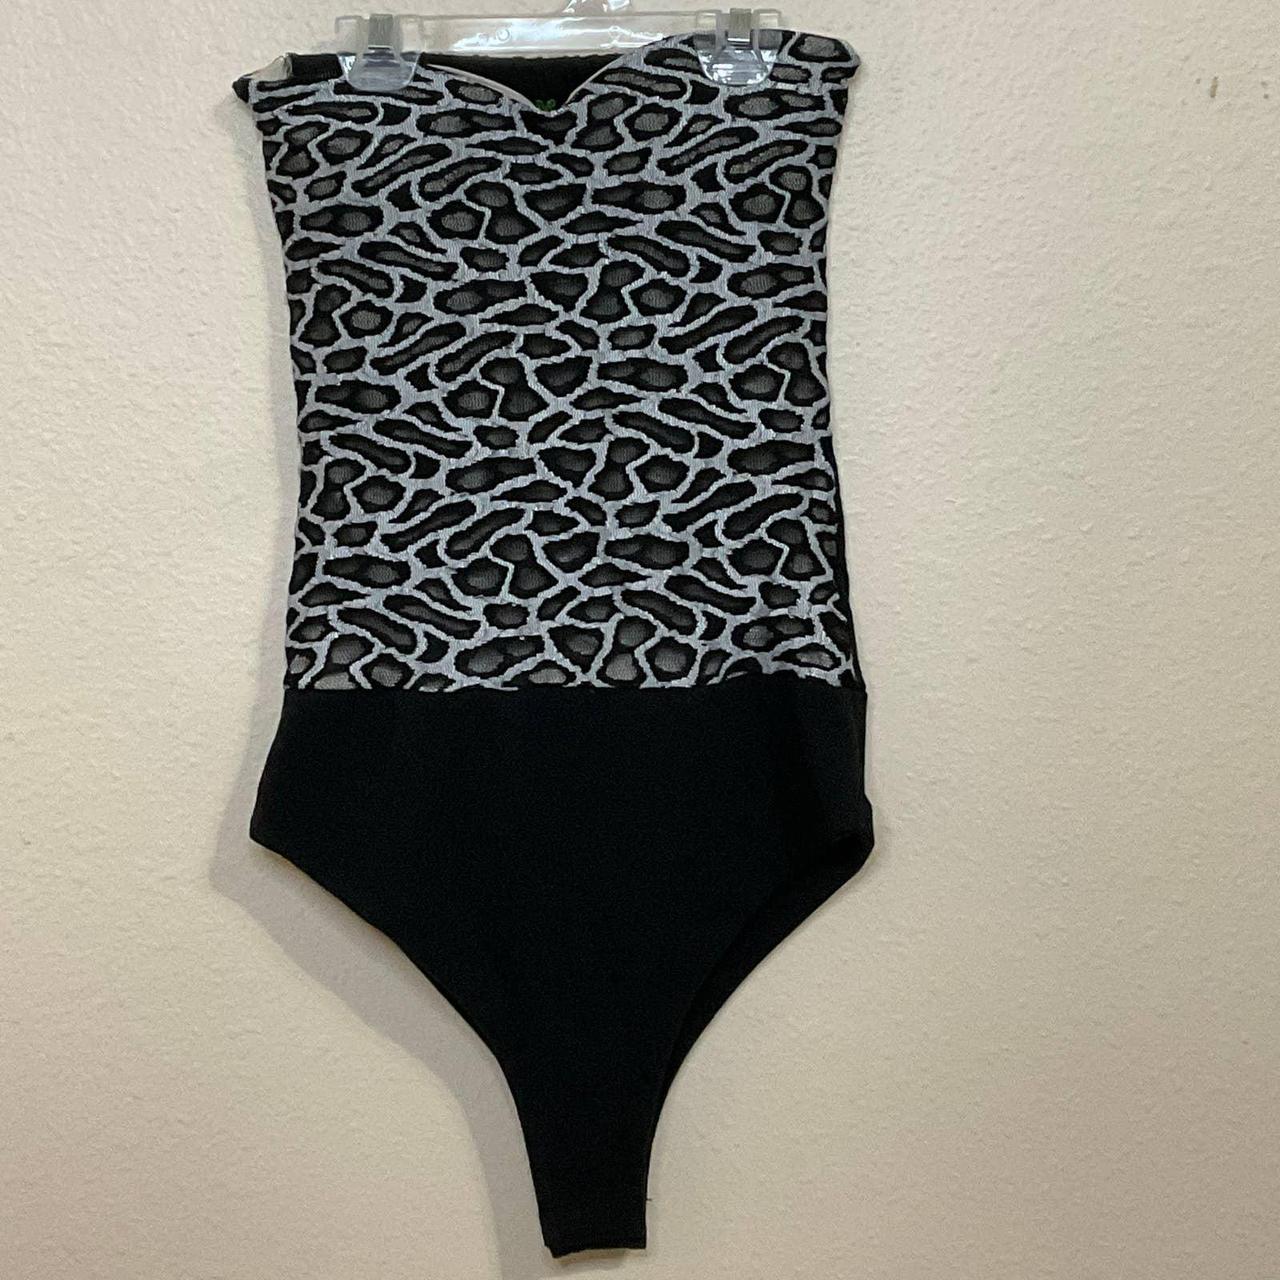 Product Image 1 - Women’s animal print bodysuit from